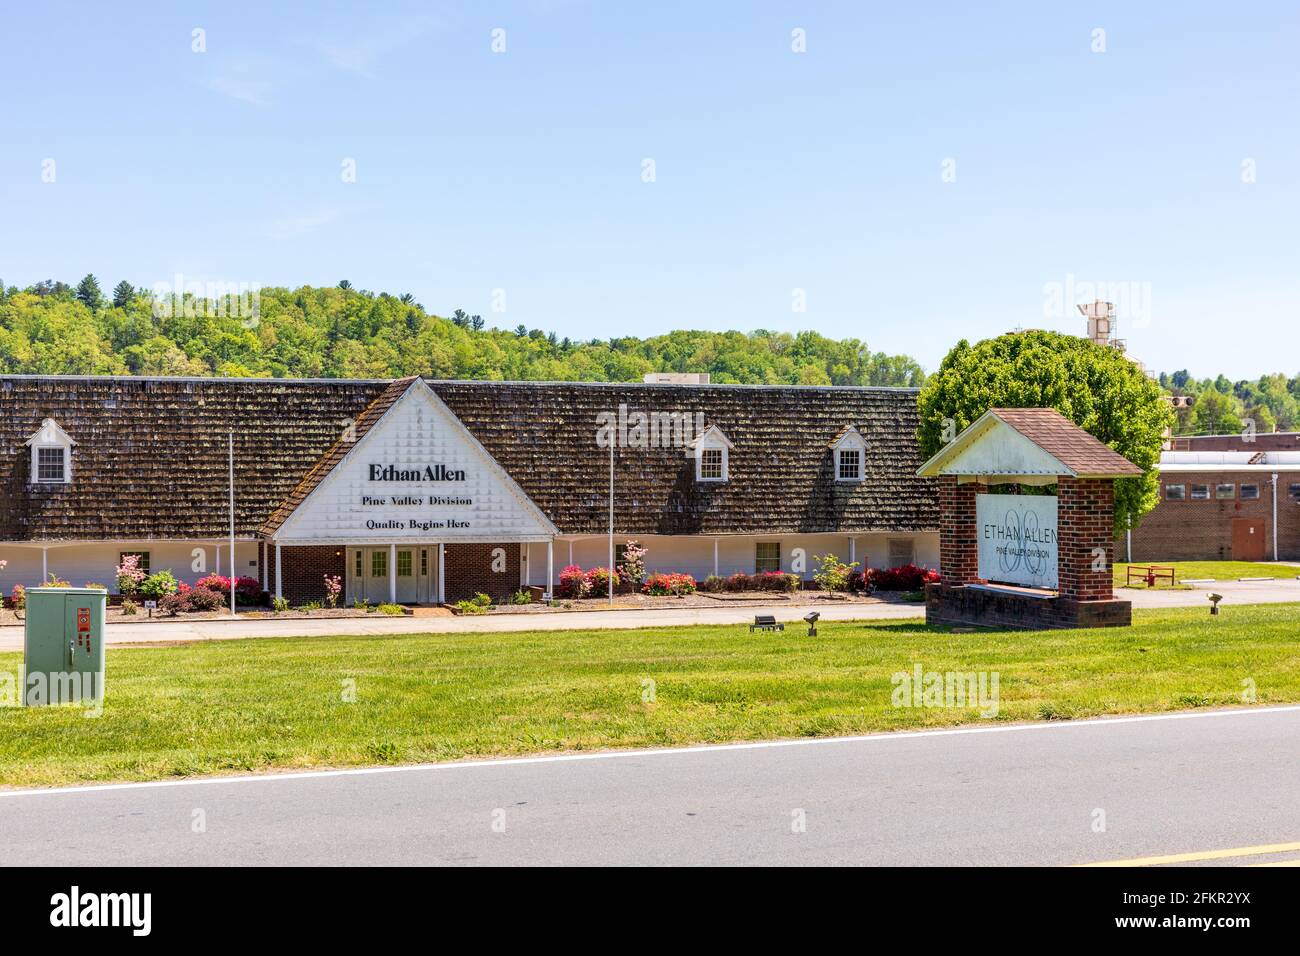 OLD FORT, NC, USA-1 MAY 2021: The Pine Valley Division of Ethan Allen Furniture manufacturing and distribution.  Old Highway 70. Sunny, spring day. Stock Photo